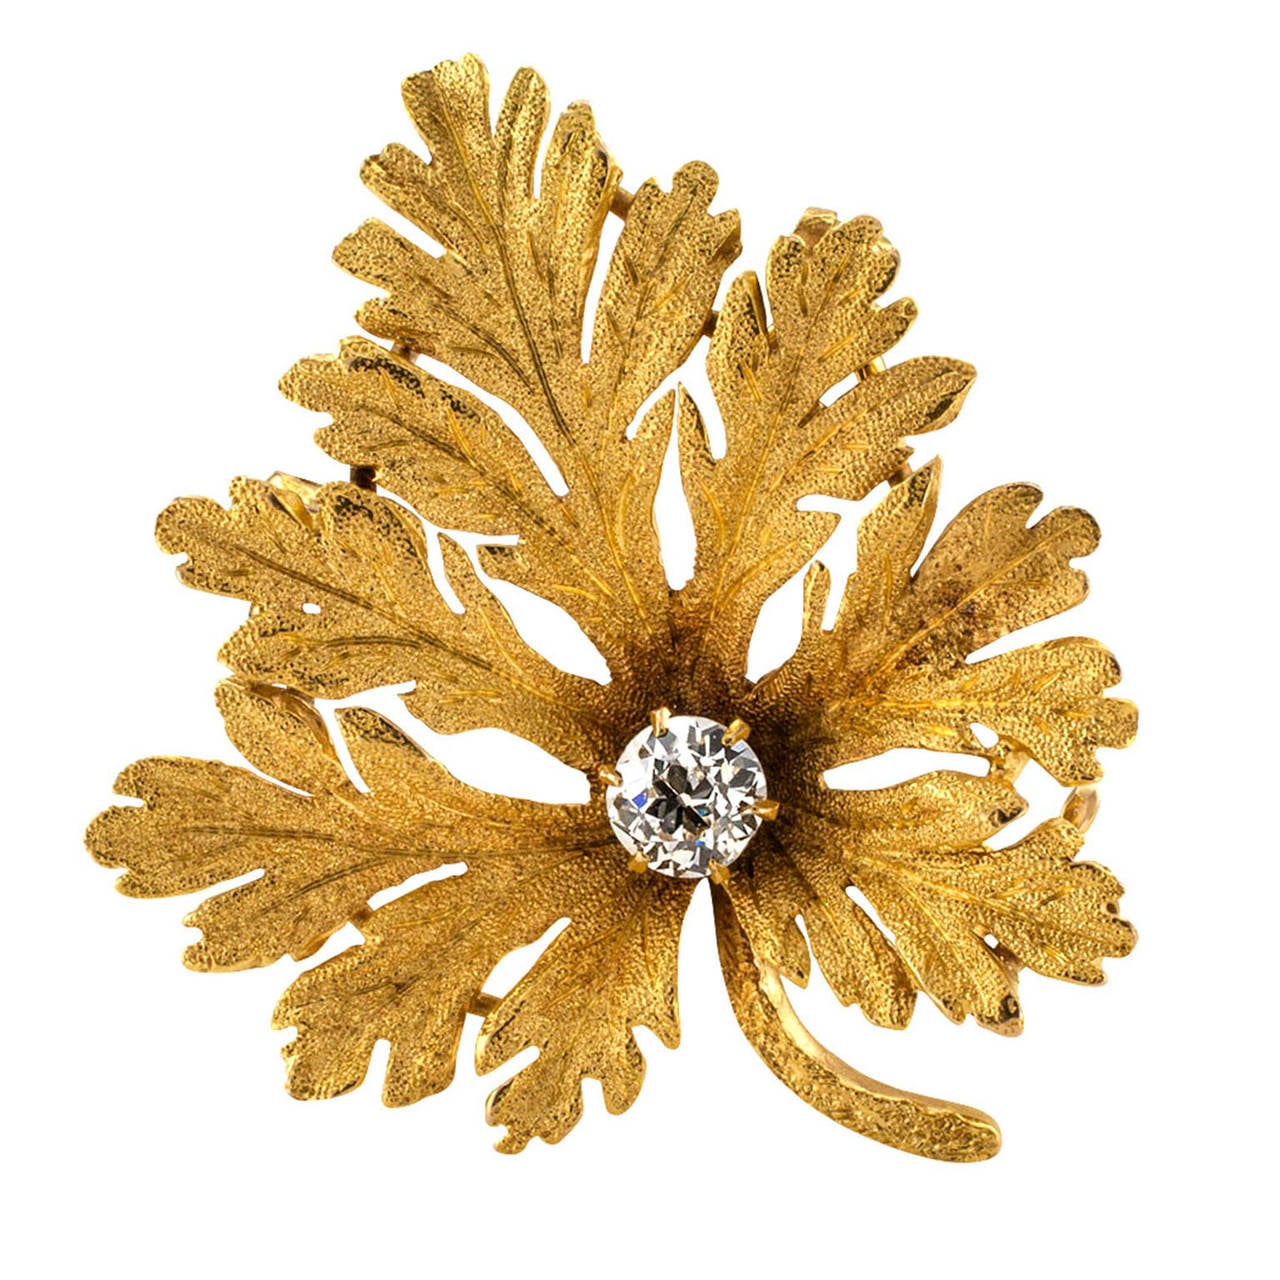 Geranium Leaf Gold and Diamond Brooch/Pendant

Not very far off from the real thing, this lovely representation of a scented geranium leaf has a folding bail on the back to allow wearing it as a pendant or as a brooch.  Made in 14k gold with a